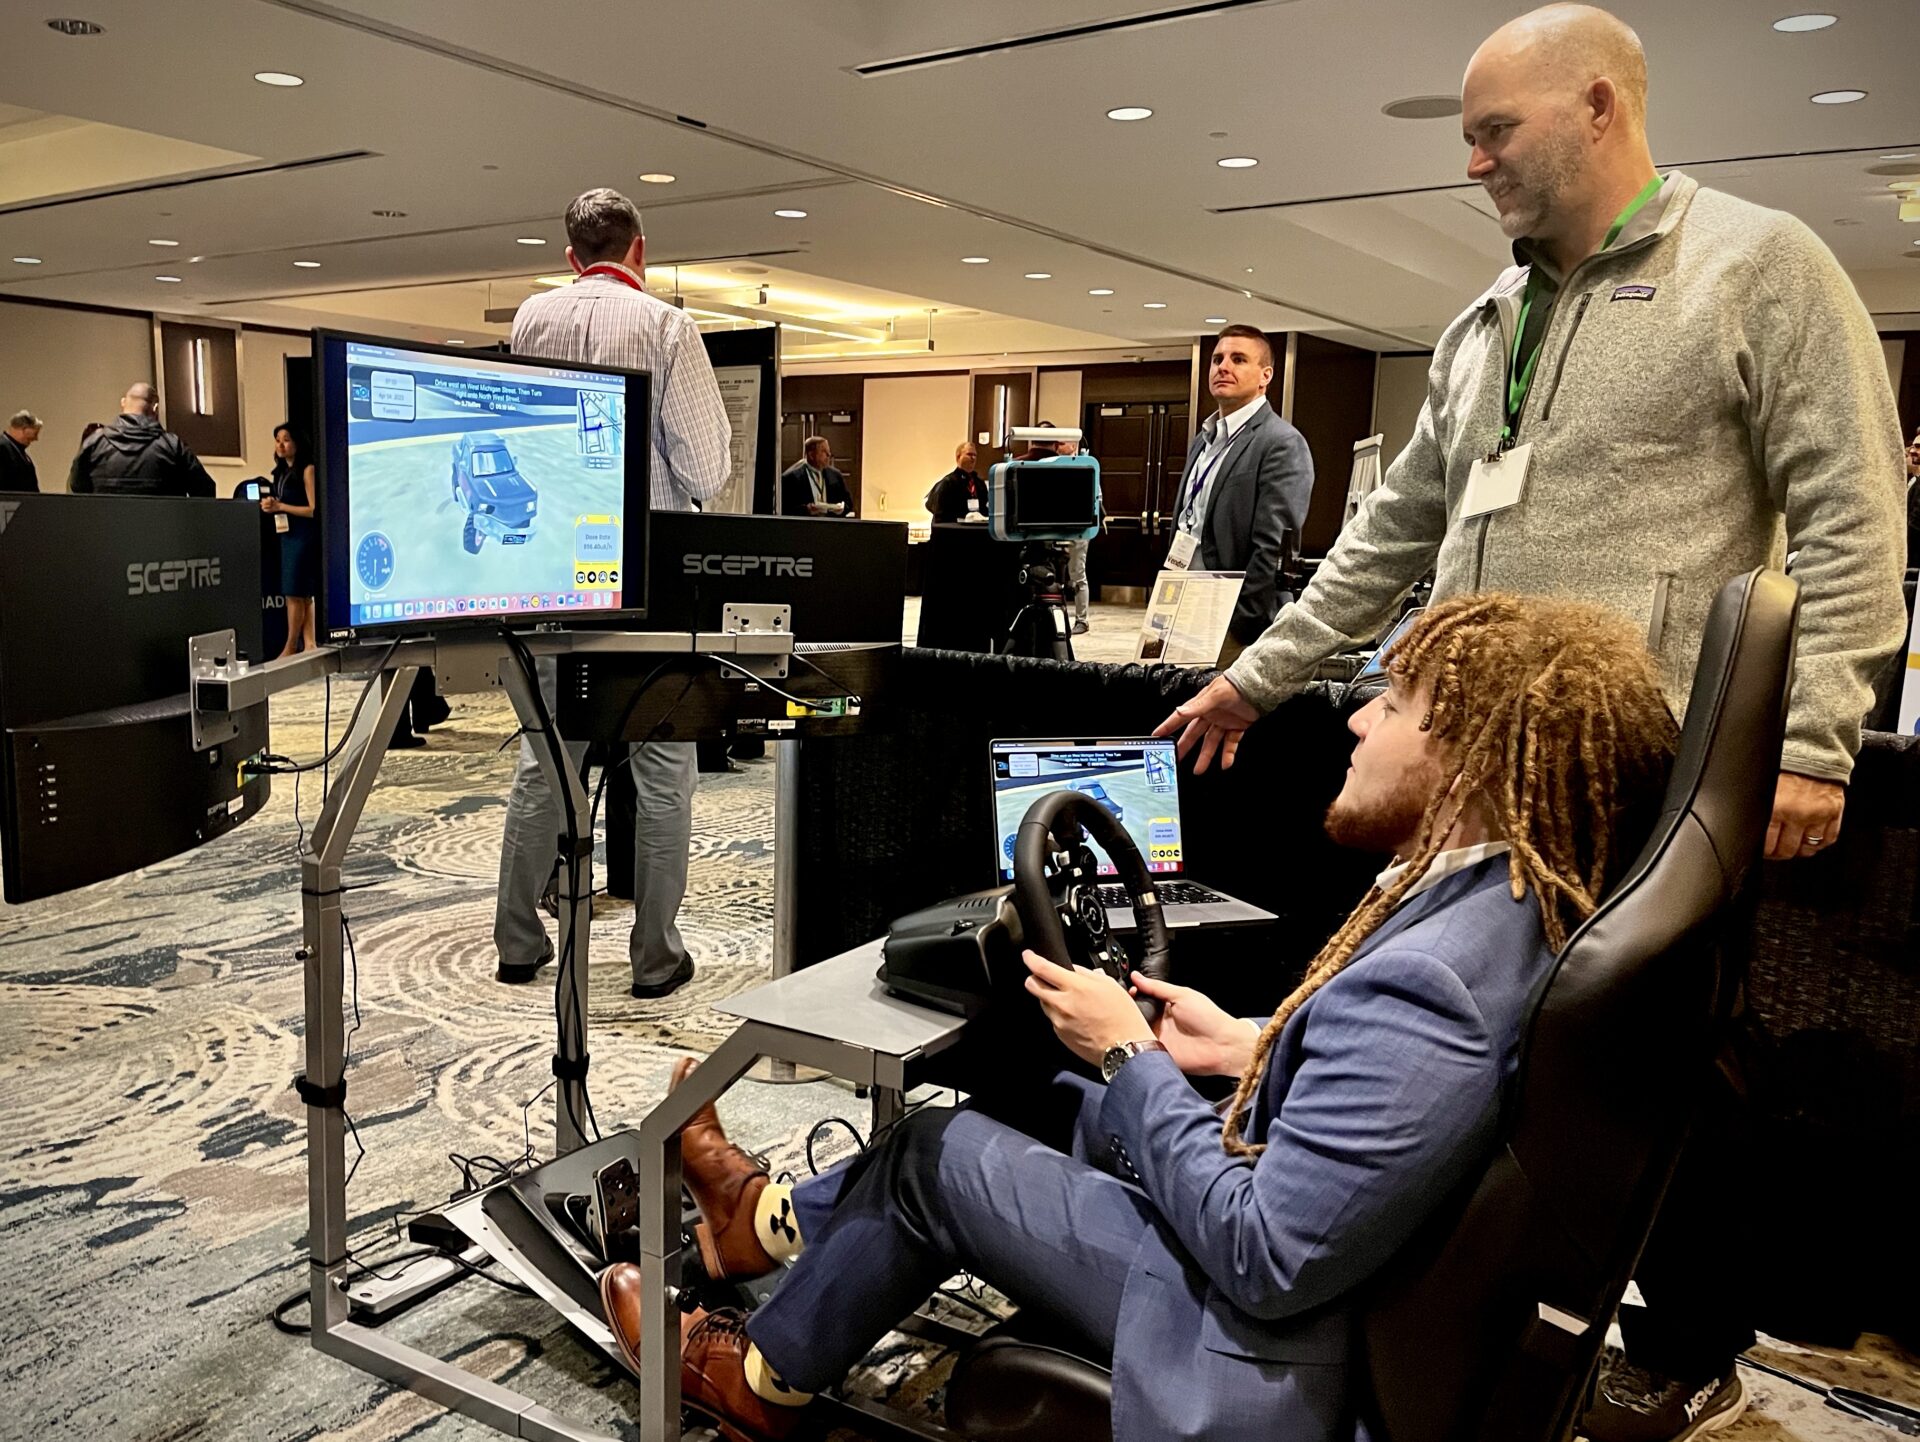 Jack Wiley, one of the younger members of the NREP conference steering committee and a health physicist in the Washington State office of Radiation Protection, defends his position on the leaderboard for <a href="https://www.radiationemergencyservices.com/radteamsim-route">RadTeamSim.Route</a>, a driving simulation that combines real-world map data with science-based radiation dose-rate readings for training emergency field teams.